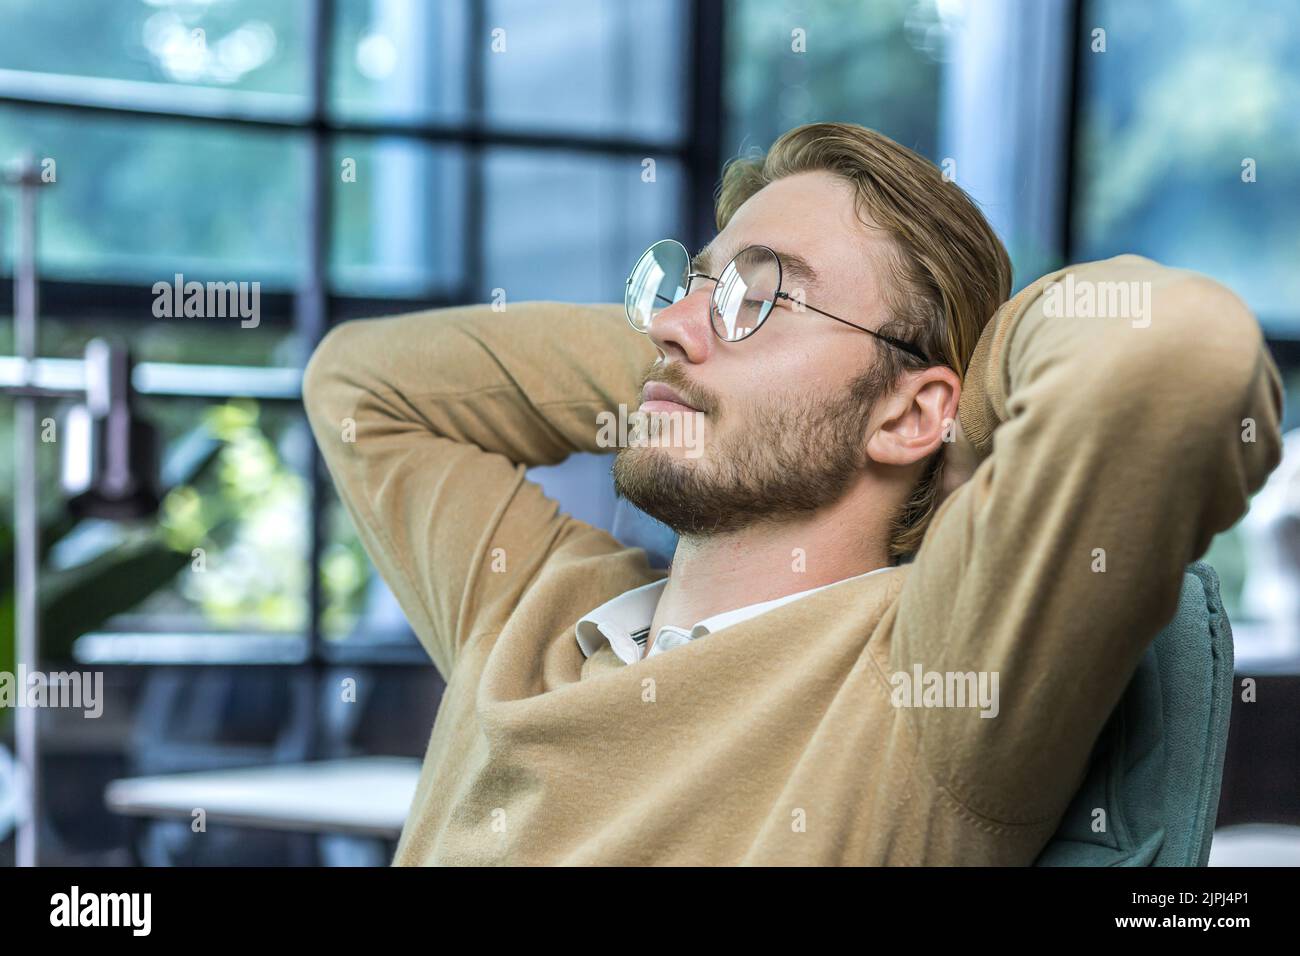 Man resting at home, young guy with closed eyes in glasses, hands behind head napping during the day, freelancer working at home remotely Stock Photo